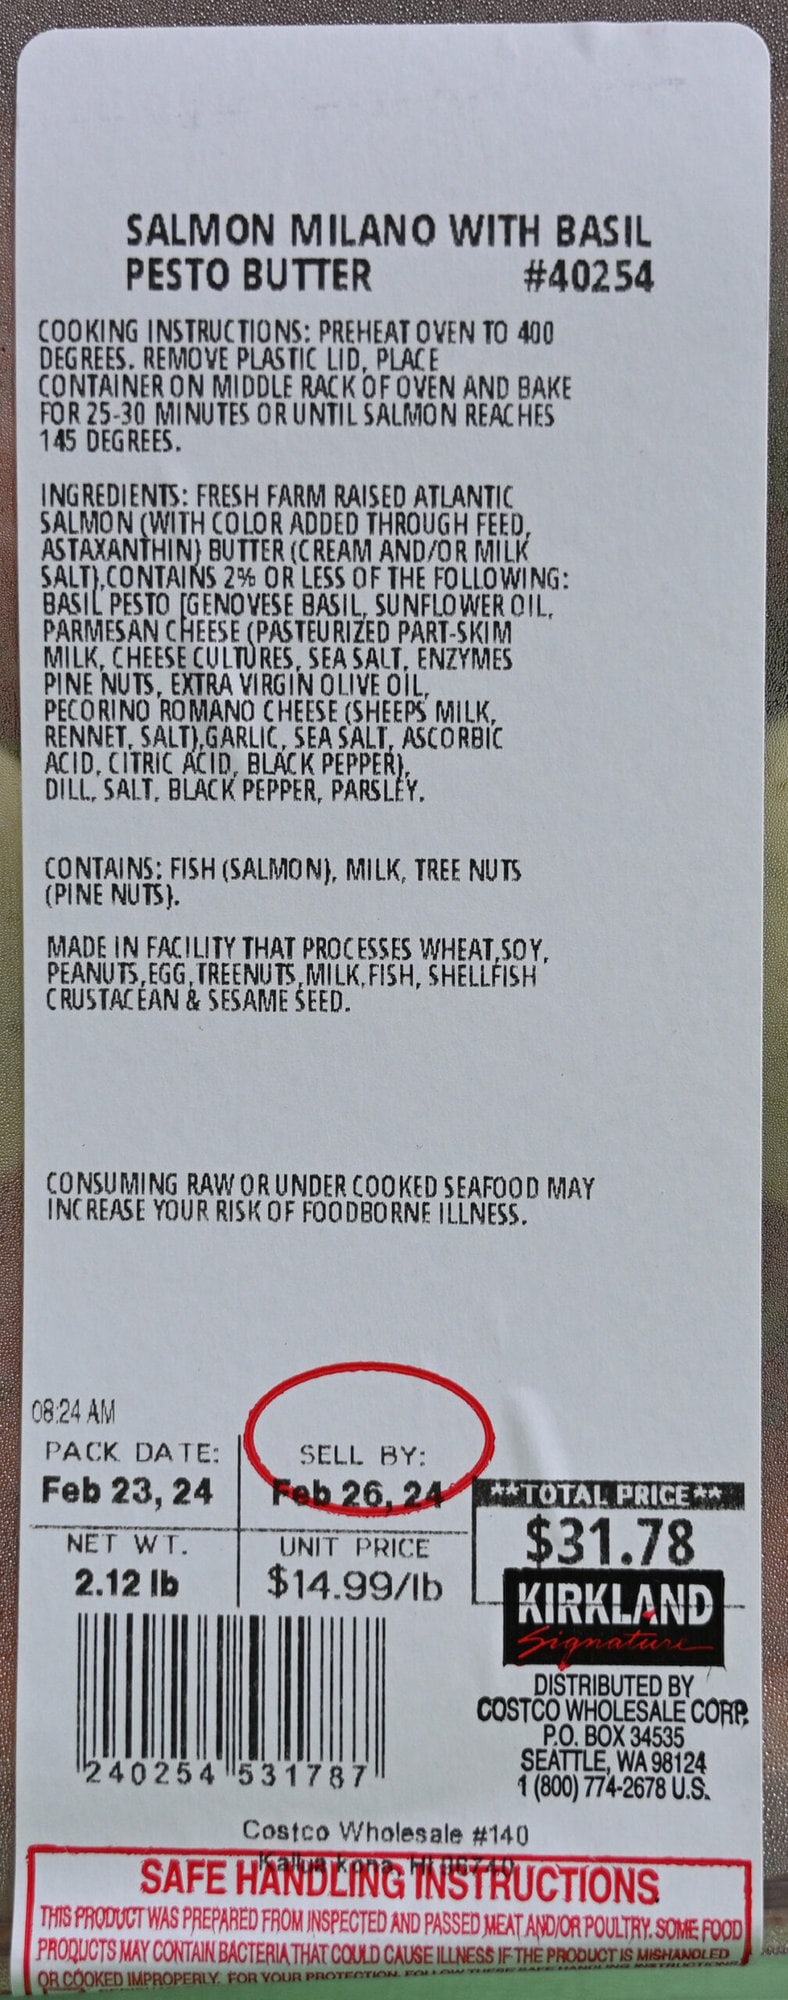 Closeup image of the front label on the salmon showing price, cooking instructions, ingredients and best before date.